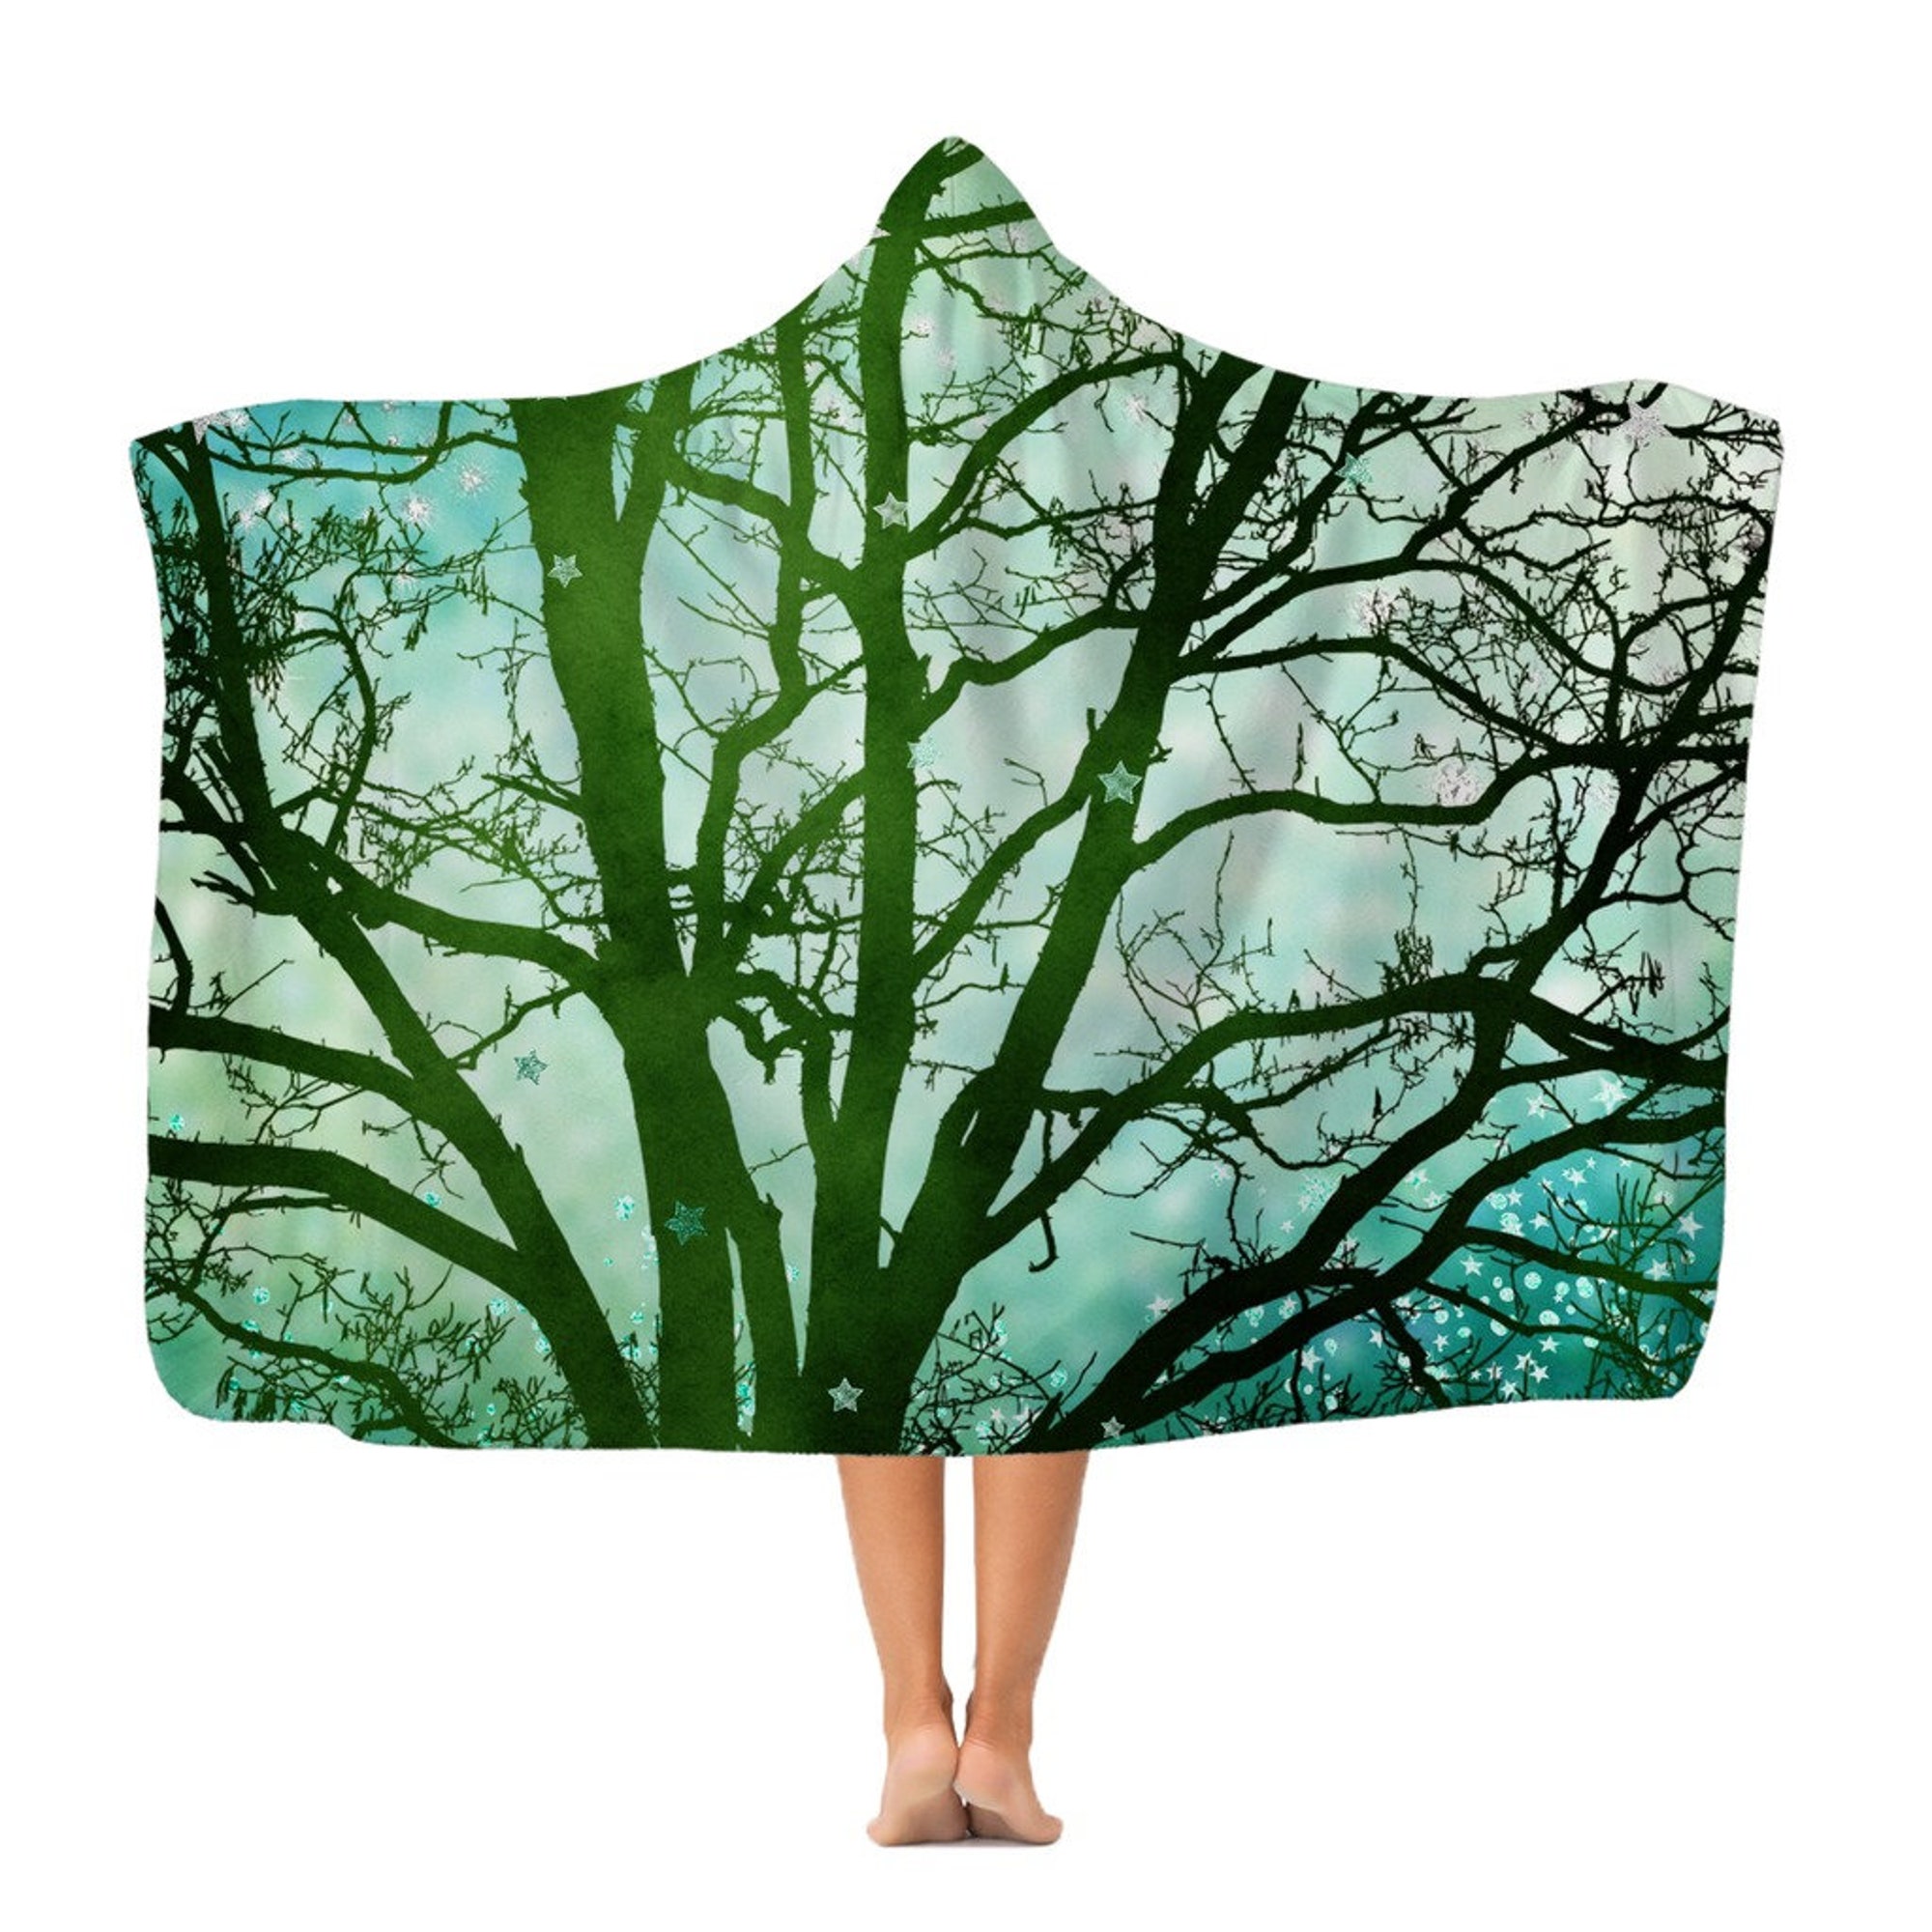 Magical Woodlands Classic Adult Hooded Blanket - Green